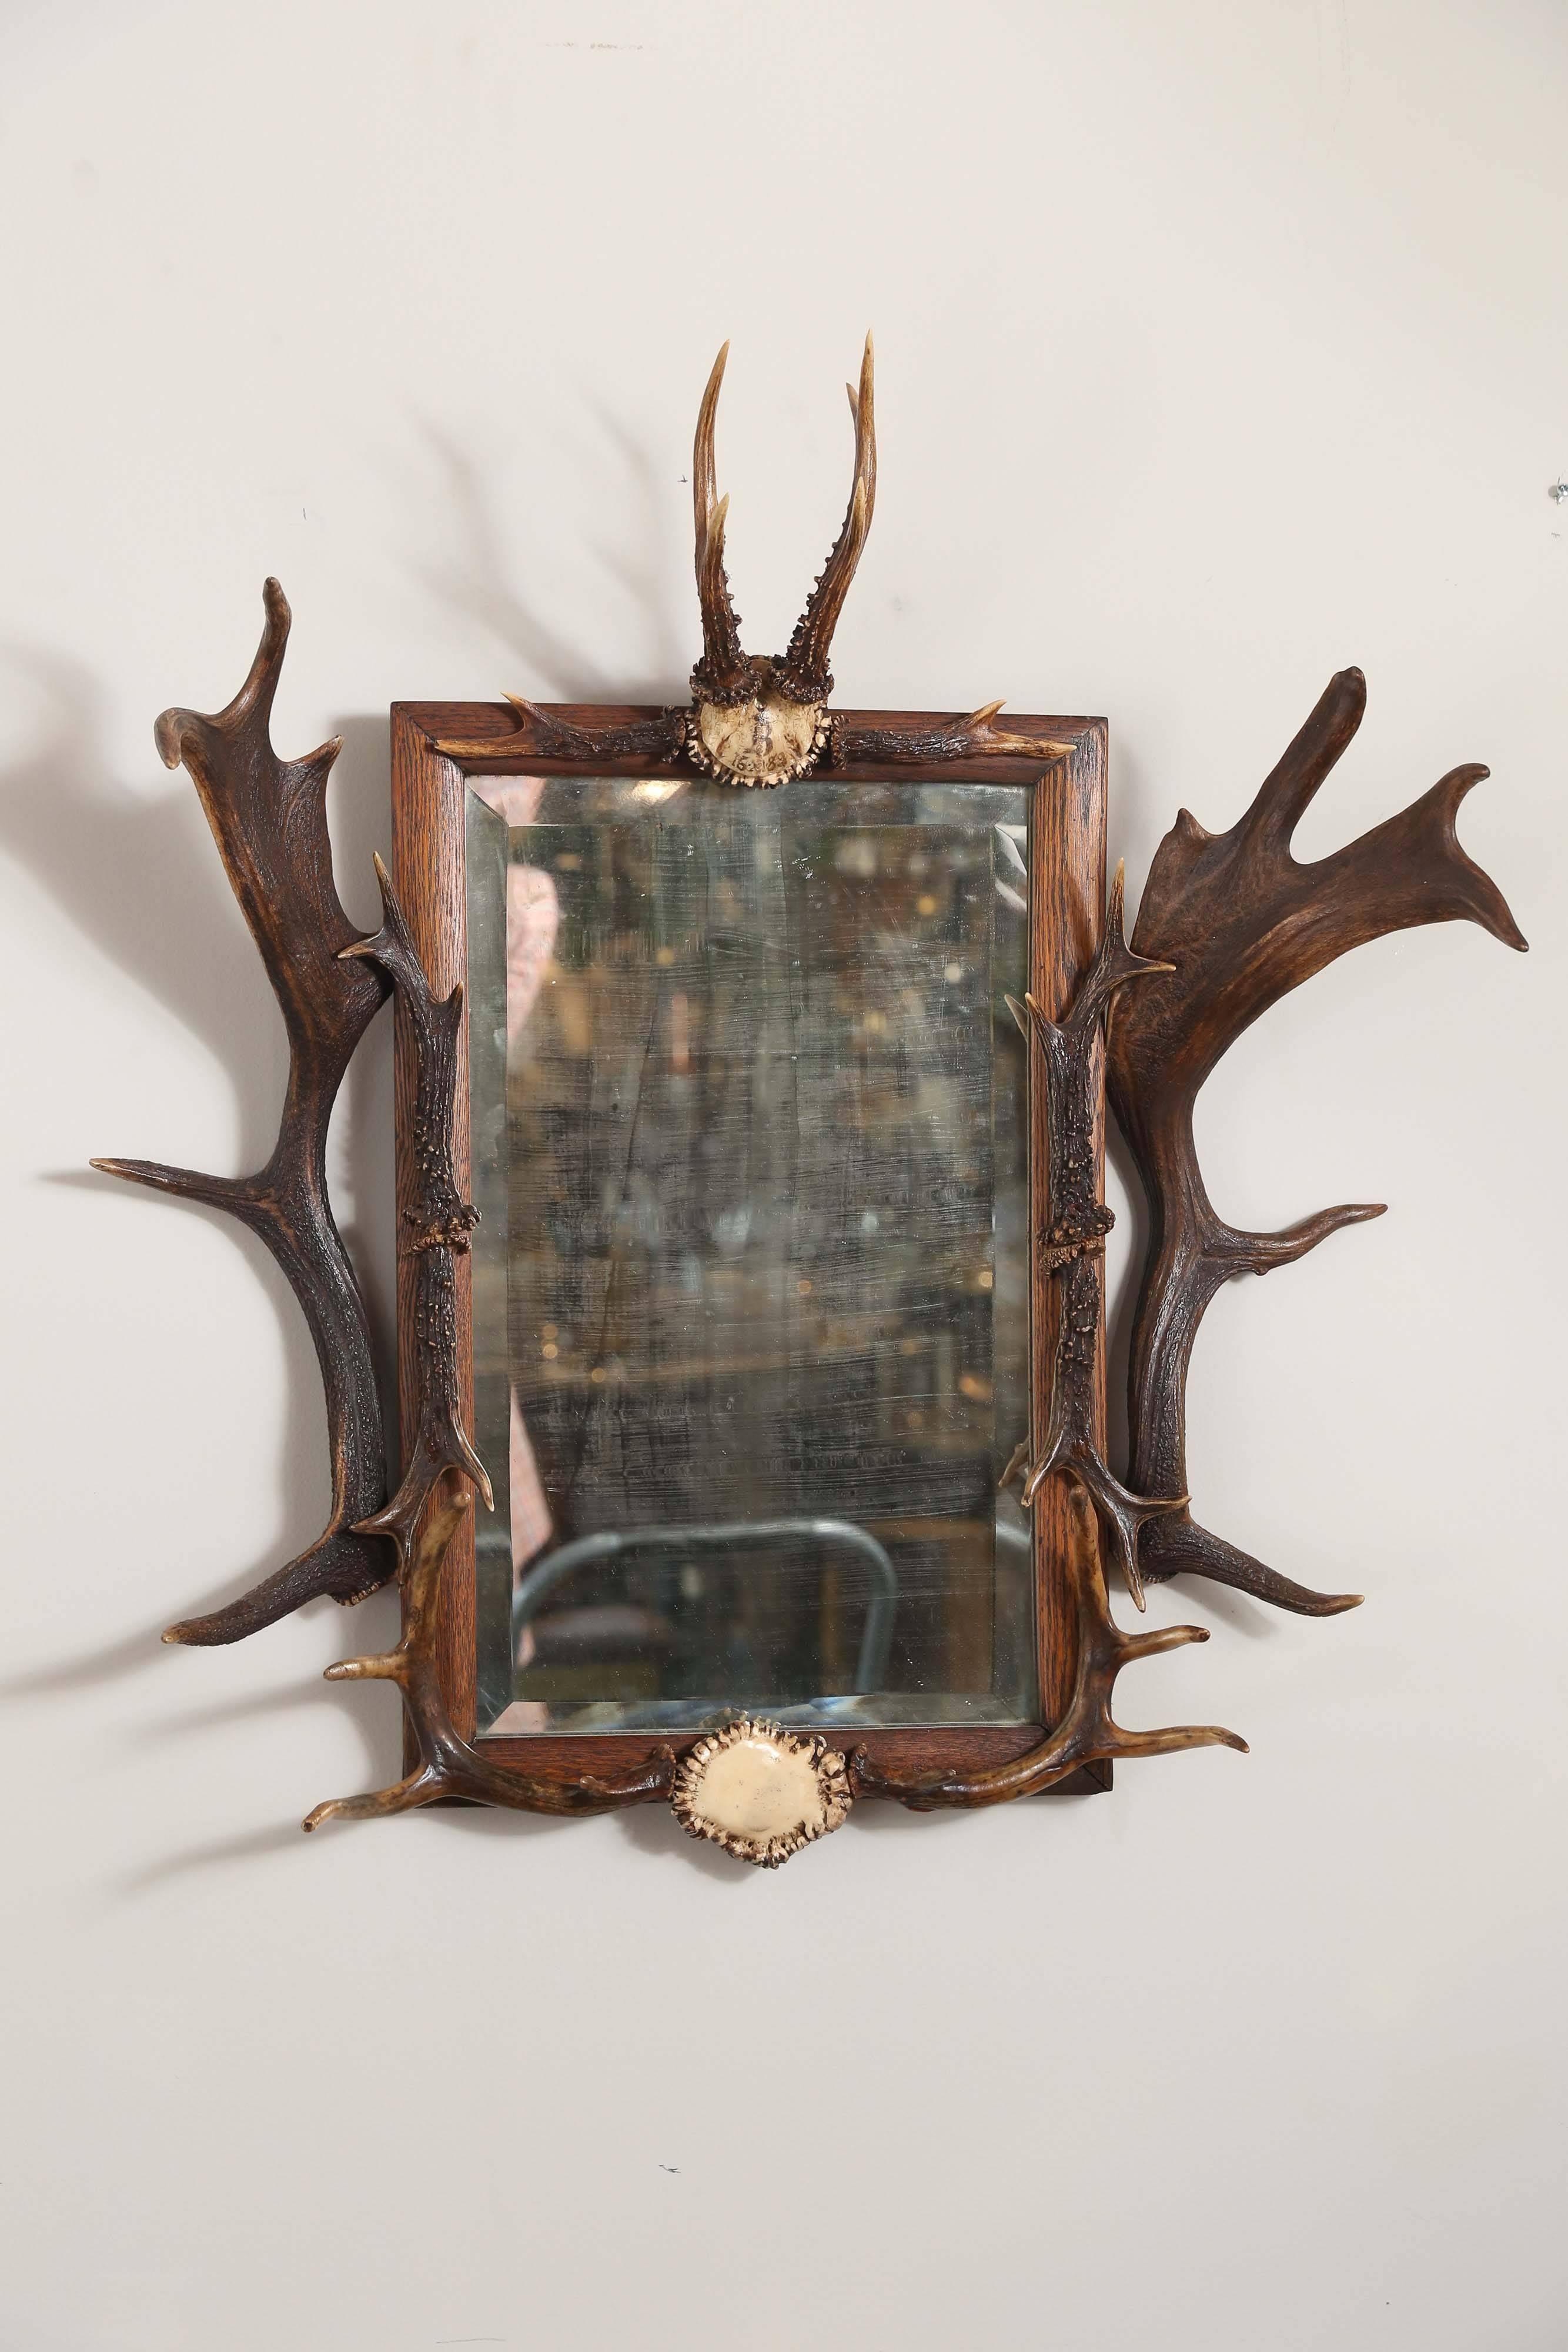 An original 19th century hunt mirror from Bodendorf Castle, Germany with original writing and antlers. Measures 30